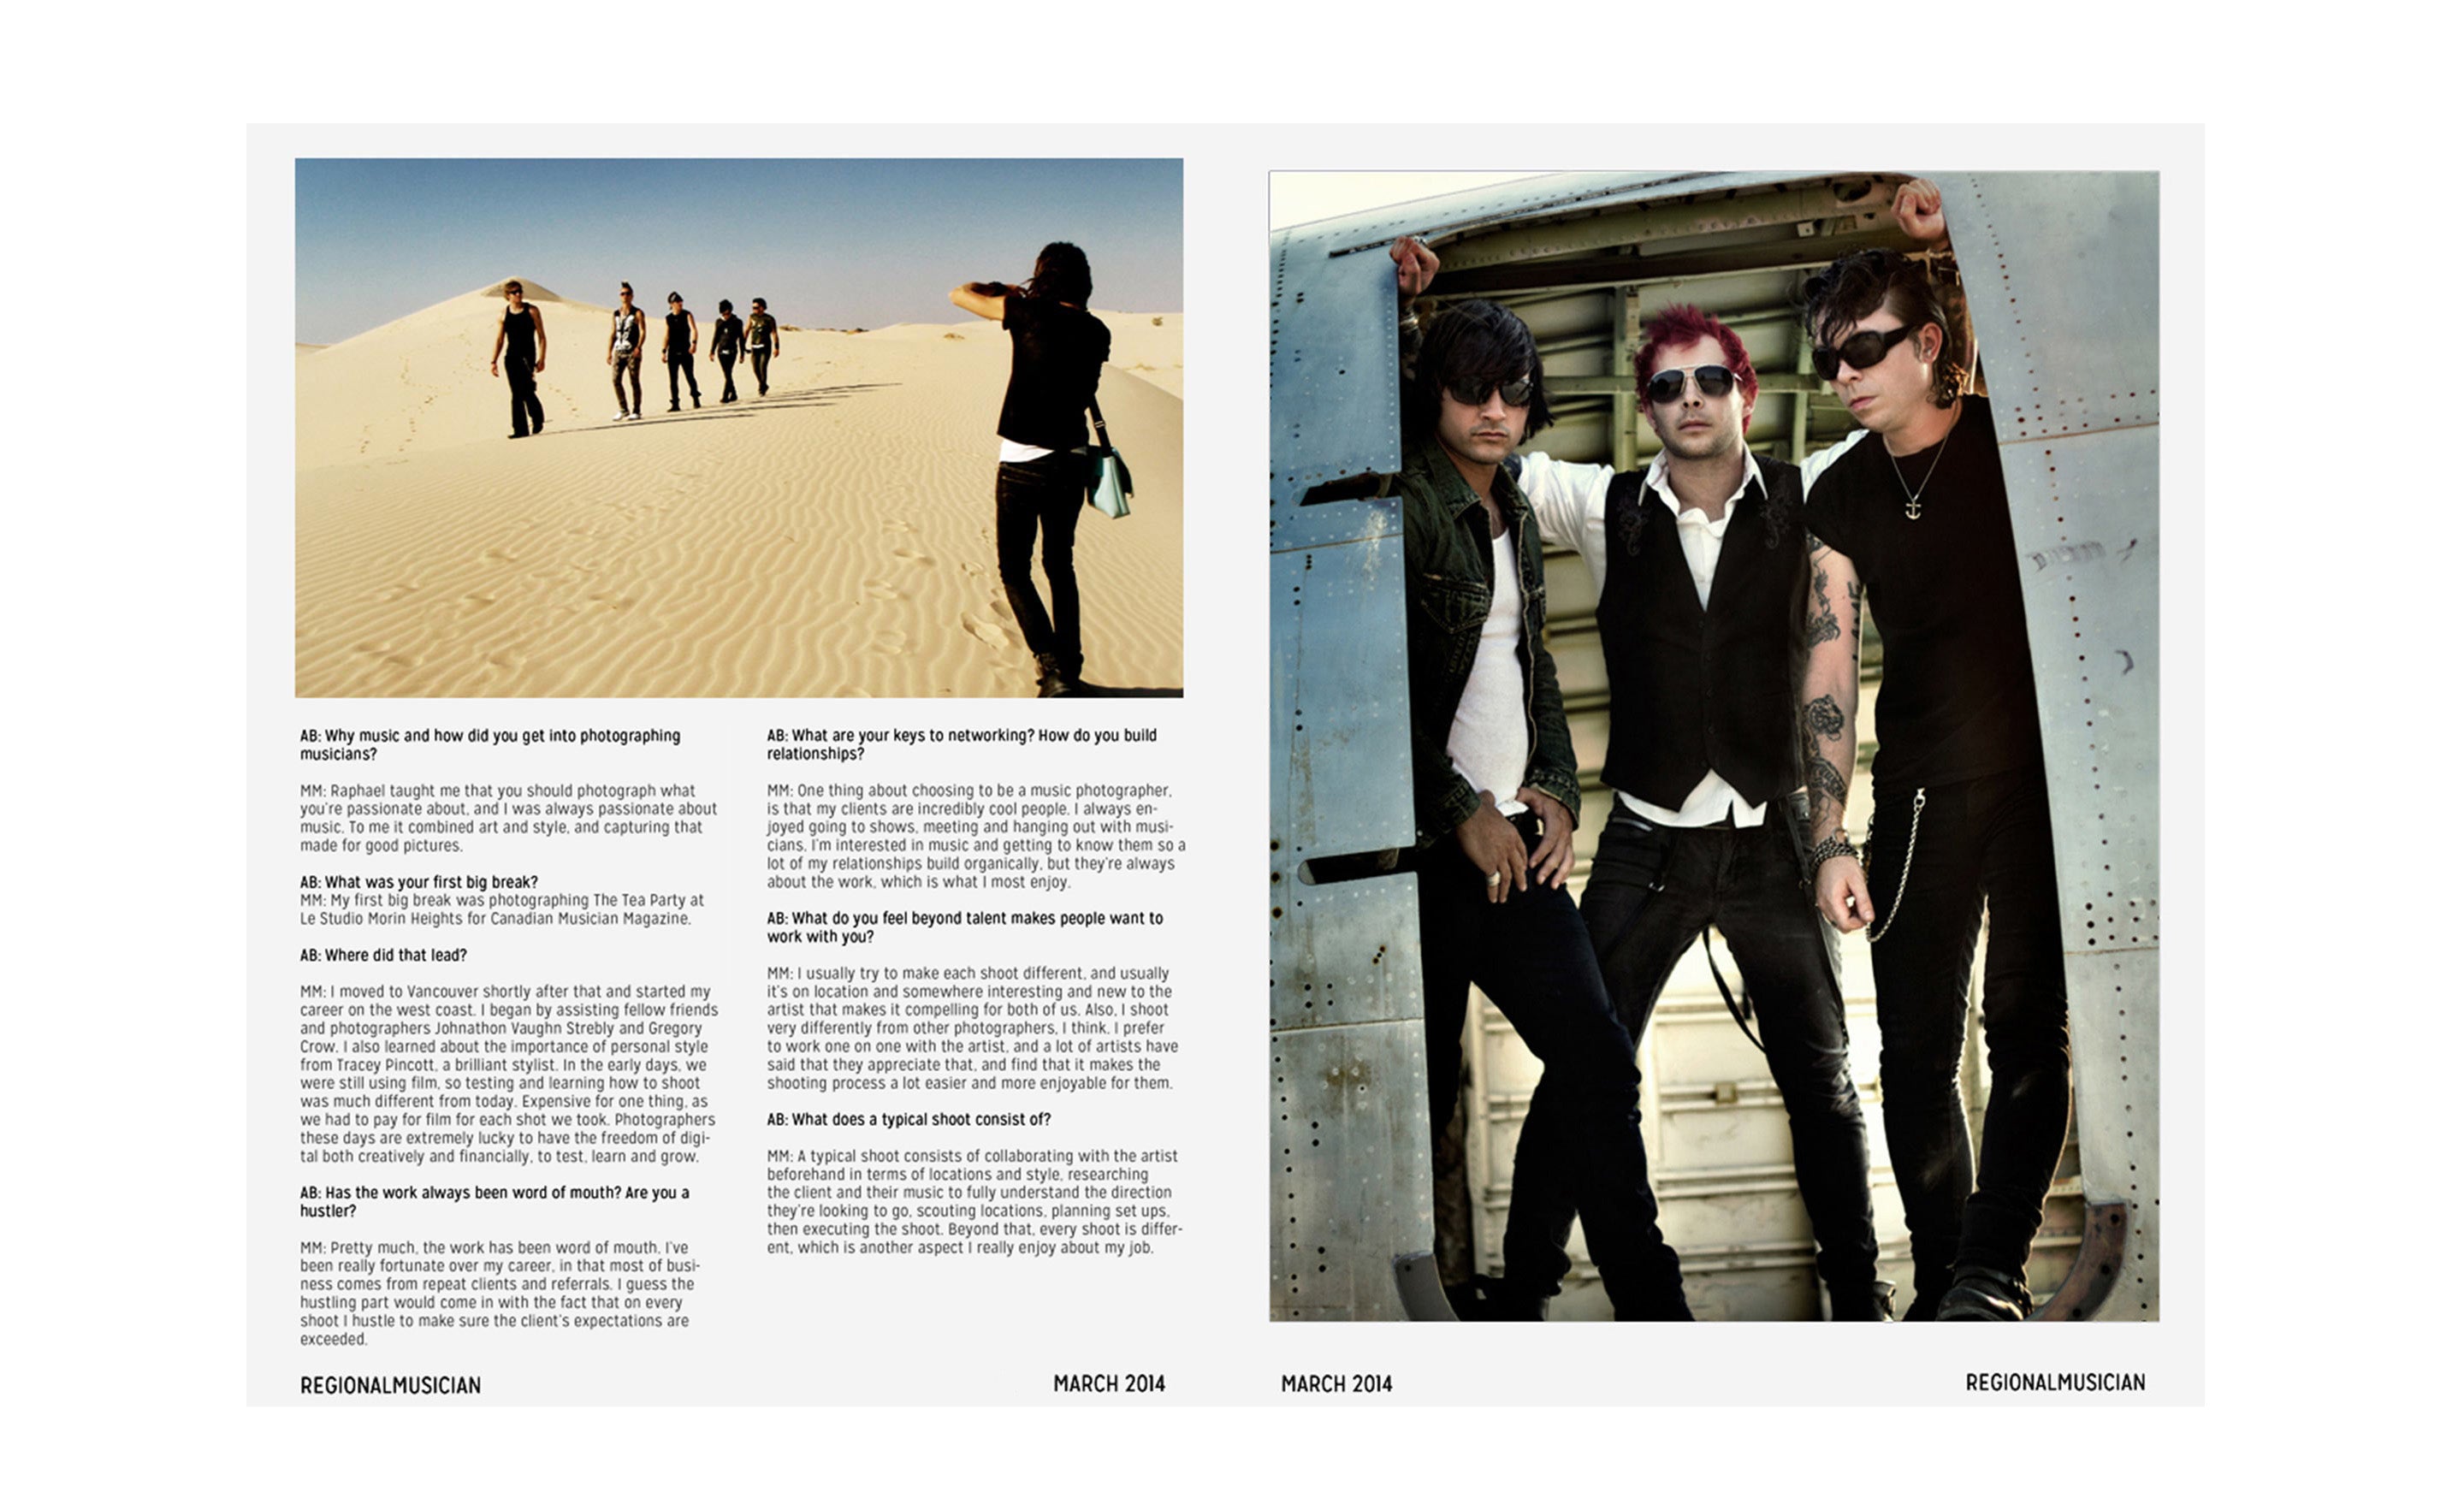 Regional Musician Magazine Interview featuring Mark Maryanovich page 2 behind the scenes Mark photographing band walking in sand dunes with interview text beneath band portrait three members in doorway of airplane on opposite side